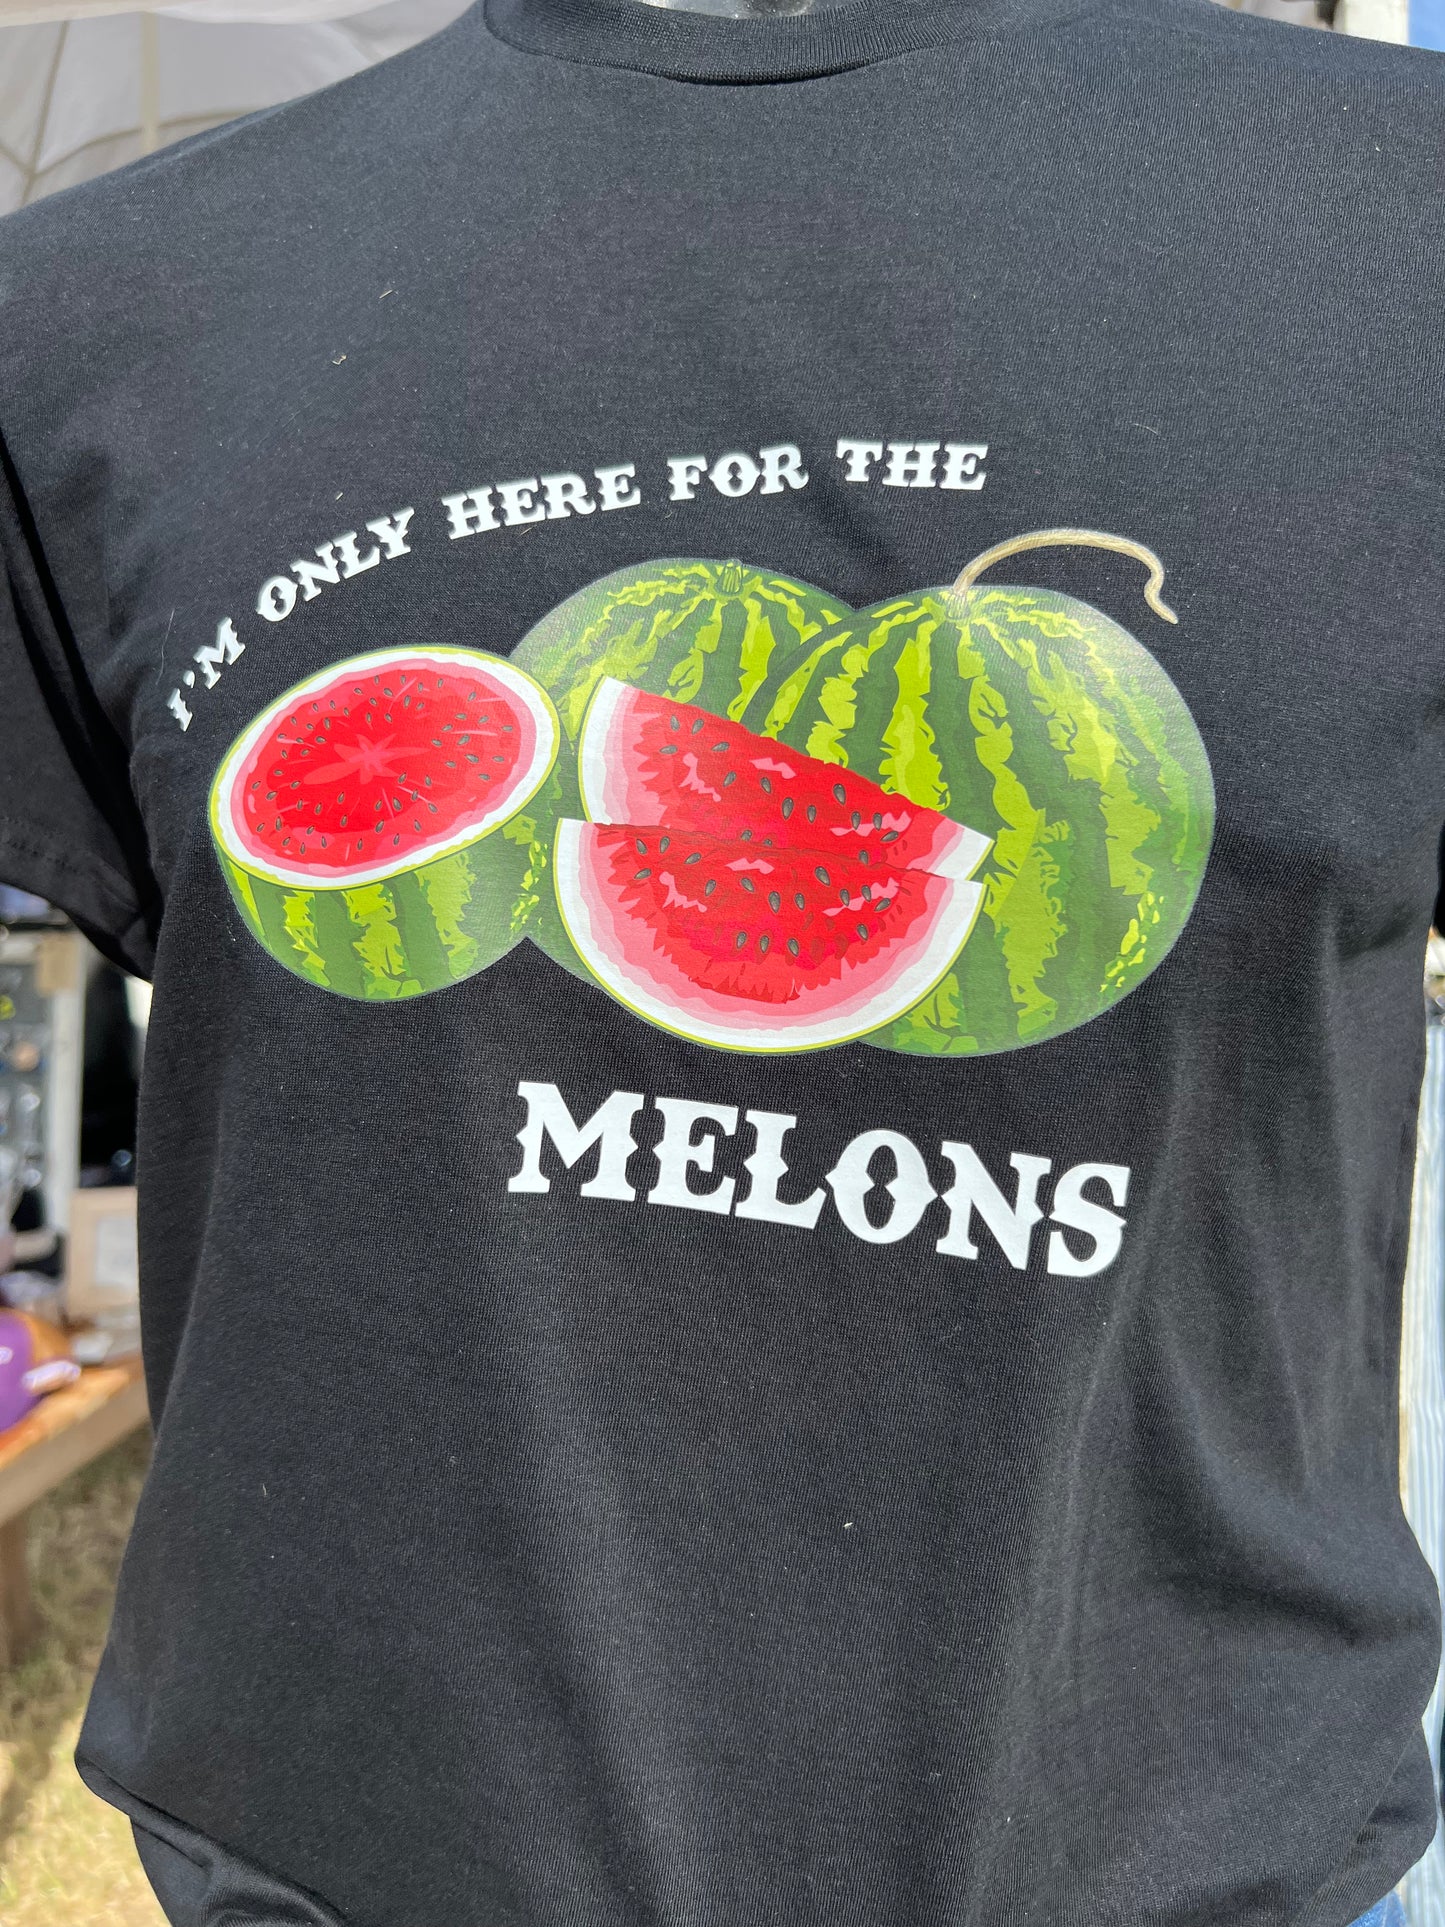 Here for the Melons Tee